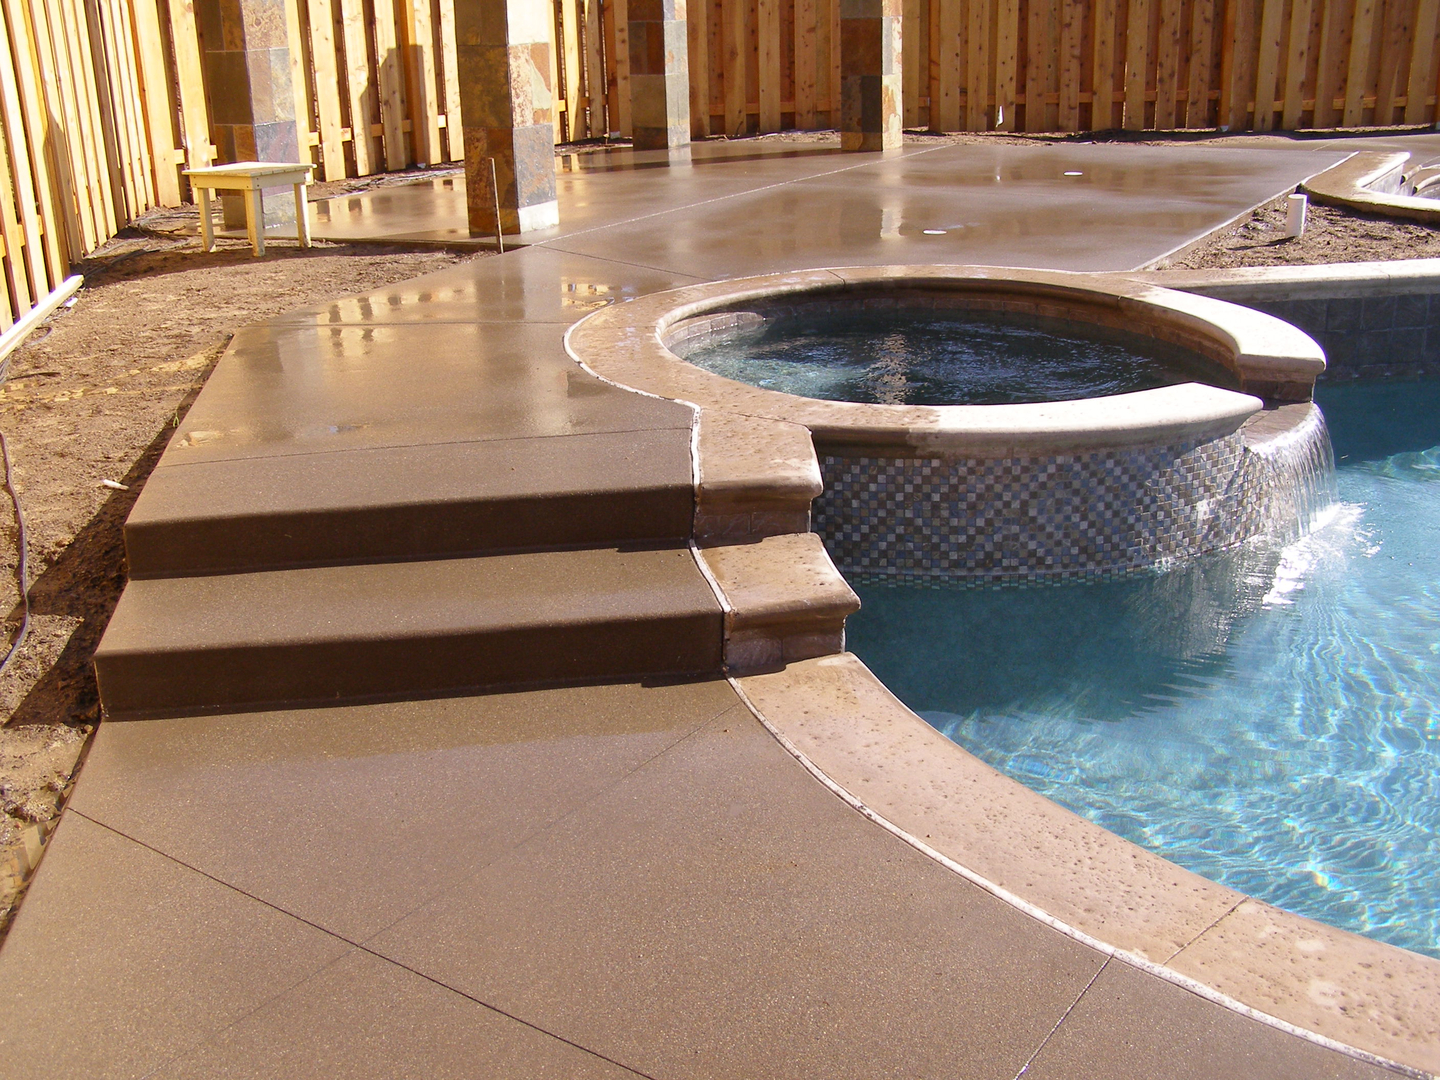 A Brown Color Tiled Floor by a Pool